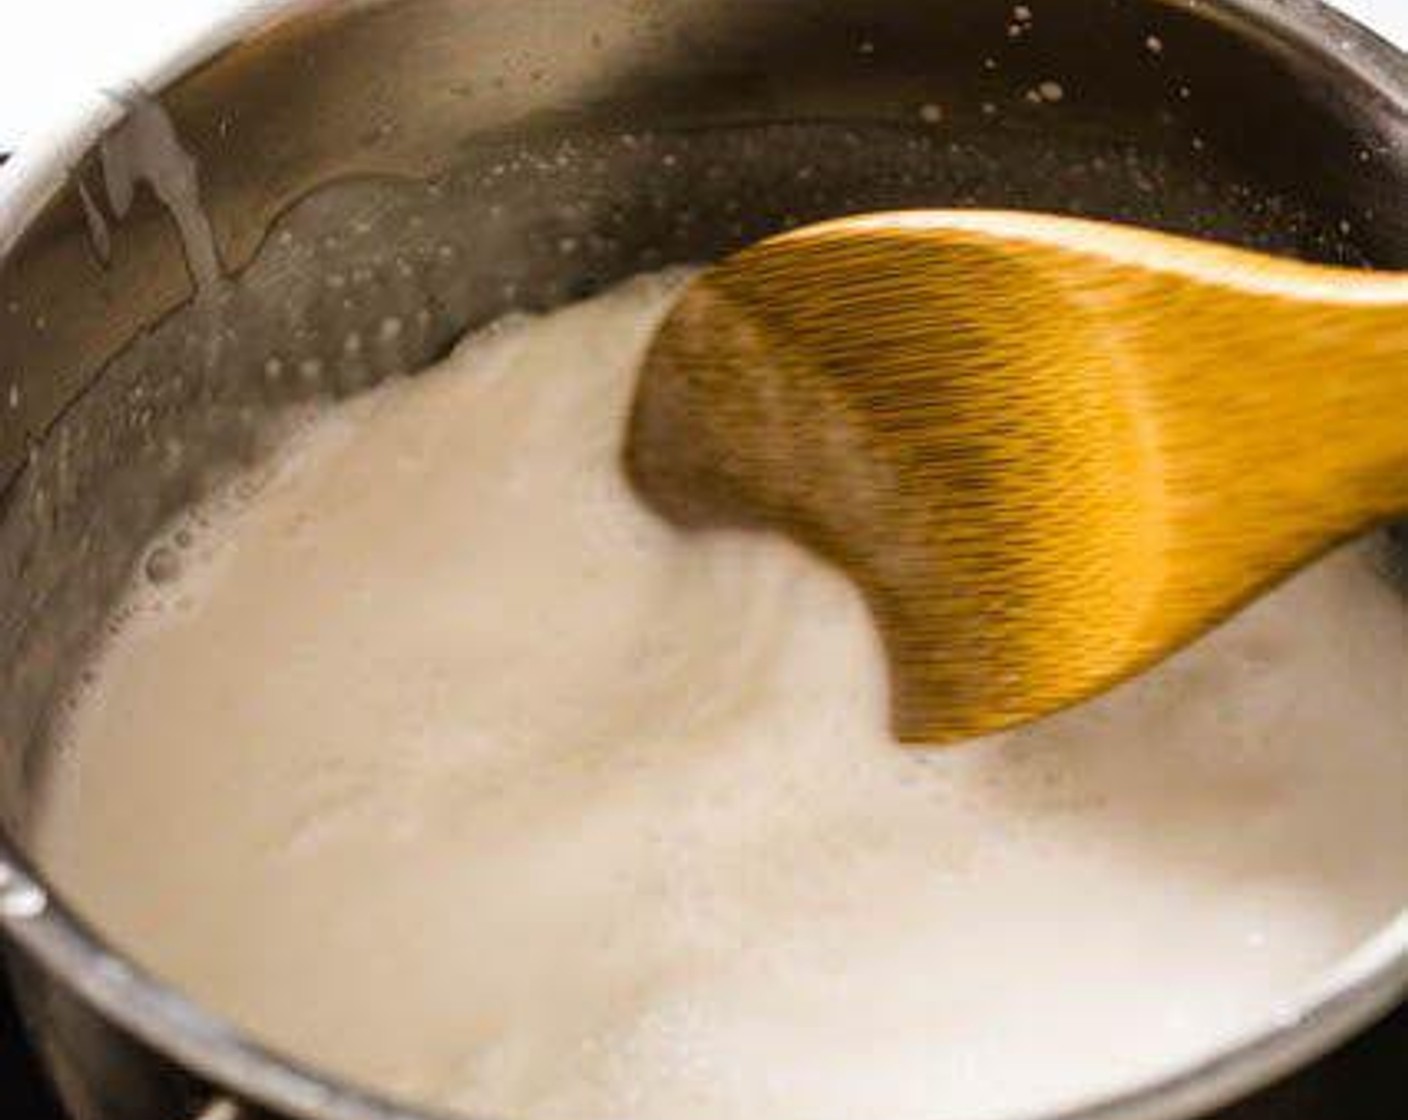 step 3 In a small saucepan or pot, heat Coconut Milk (1 cup) over medium heat. As it starts to boil, add the Palm Sugar (2 1/2 Tbsp) and Salt (1 pinch). Stir till the sugar and salt have dissolved. Set aside about 1/4 cup of the coconut milk mixture for serving later.